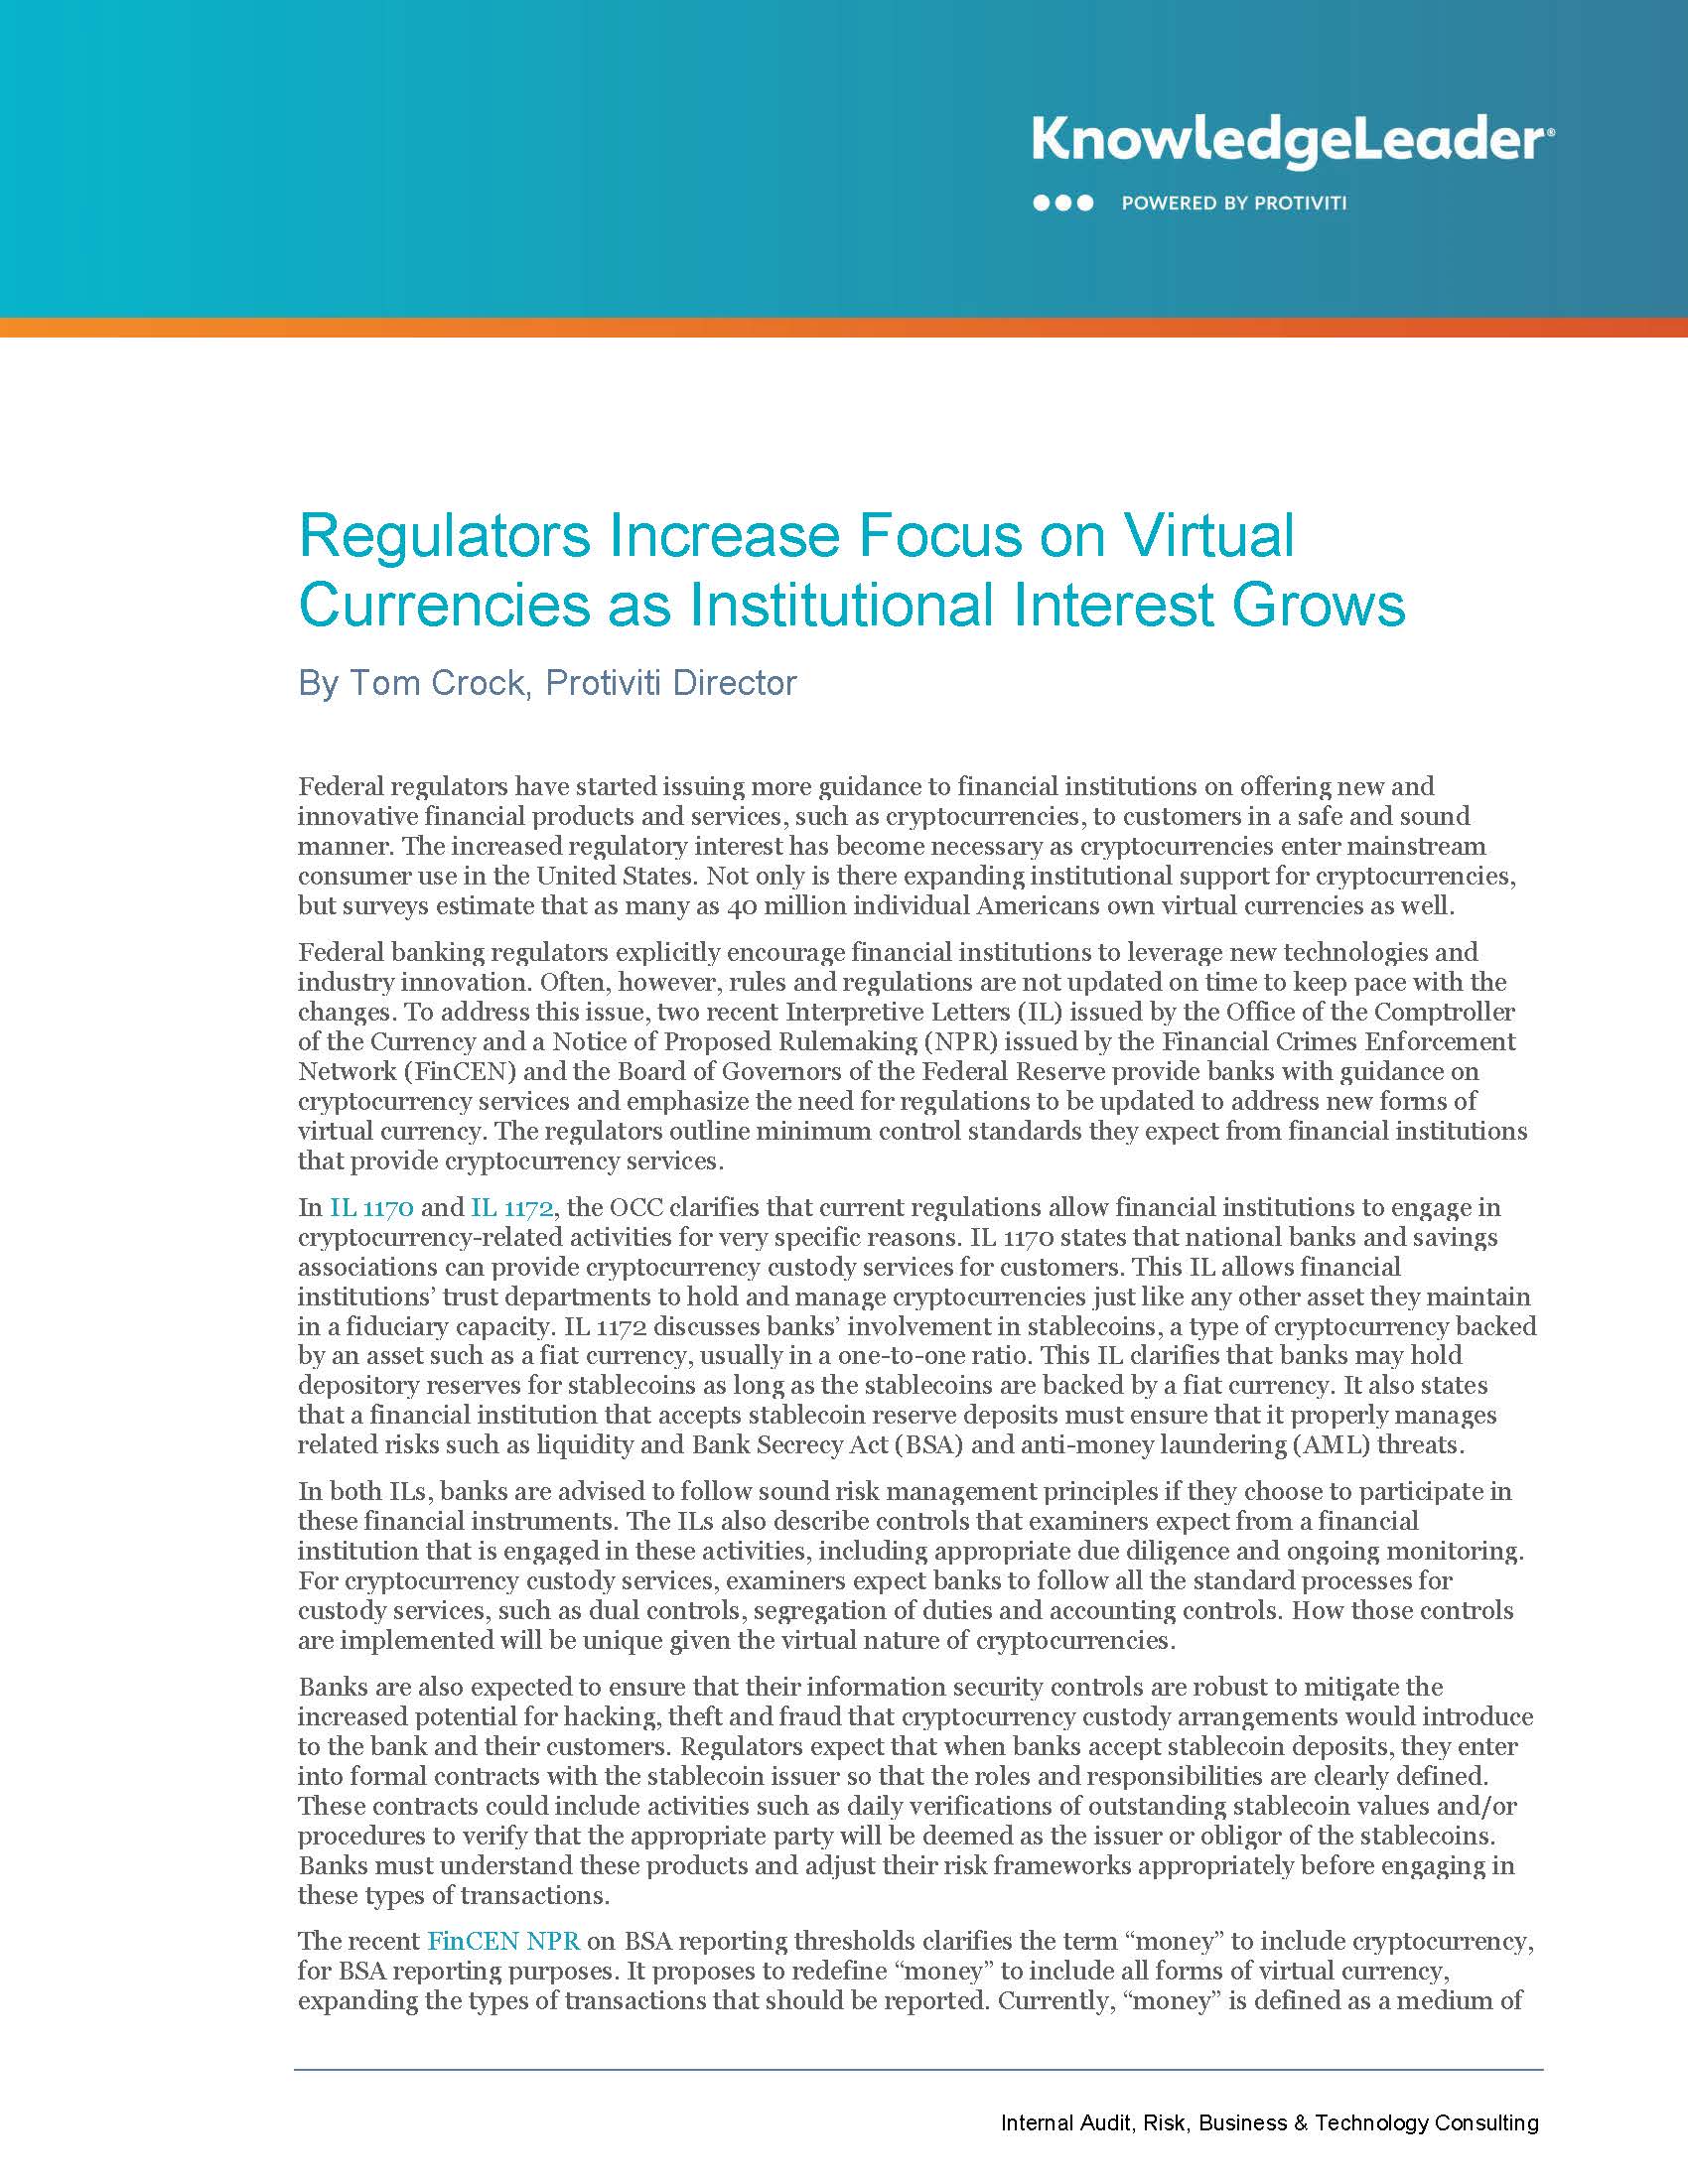 Screenshot of the first page of Regulators Increase Focus on Virtual Currencies as Institutional Interest Grows